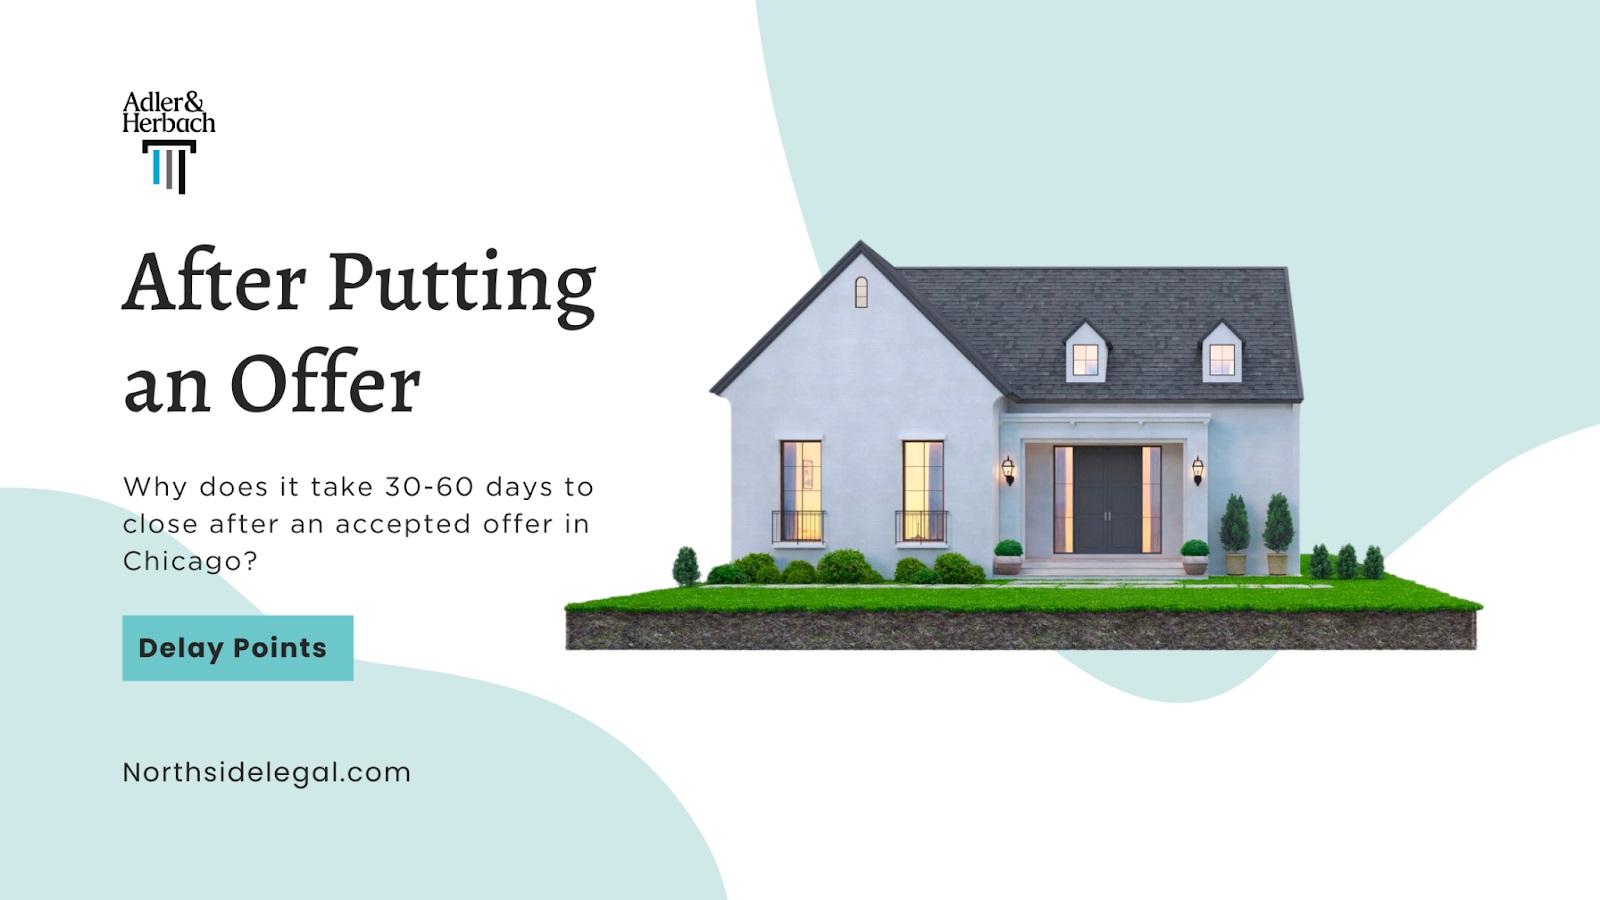 How Long Does It Take To Close After Putting An Offer On A House in Chicago?